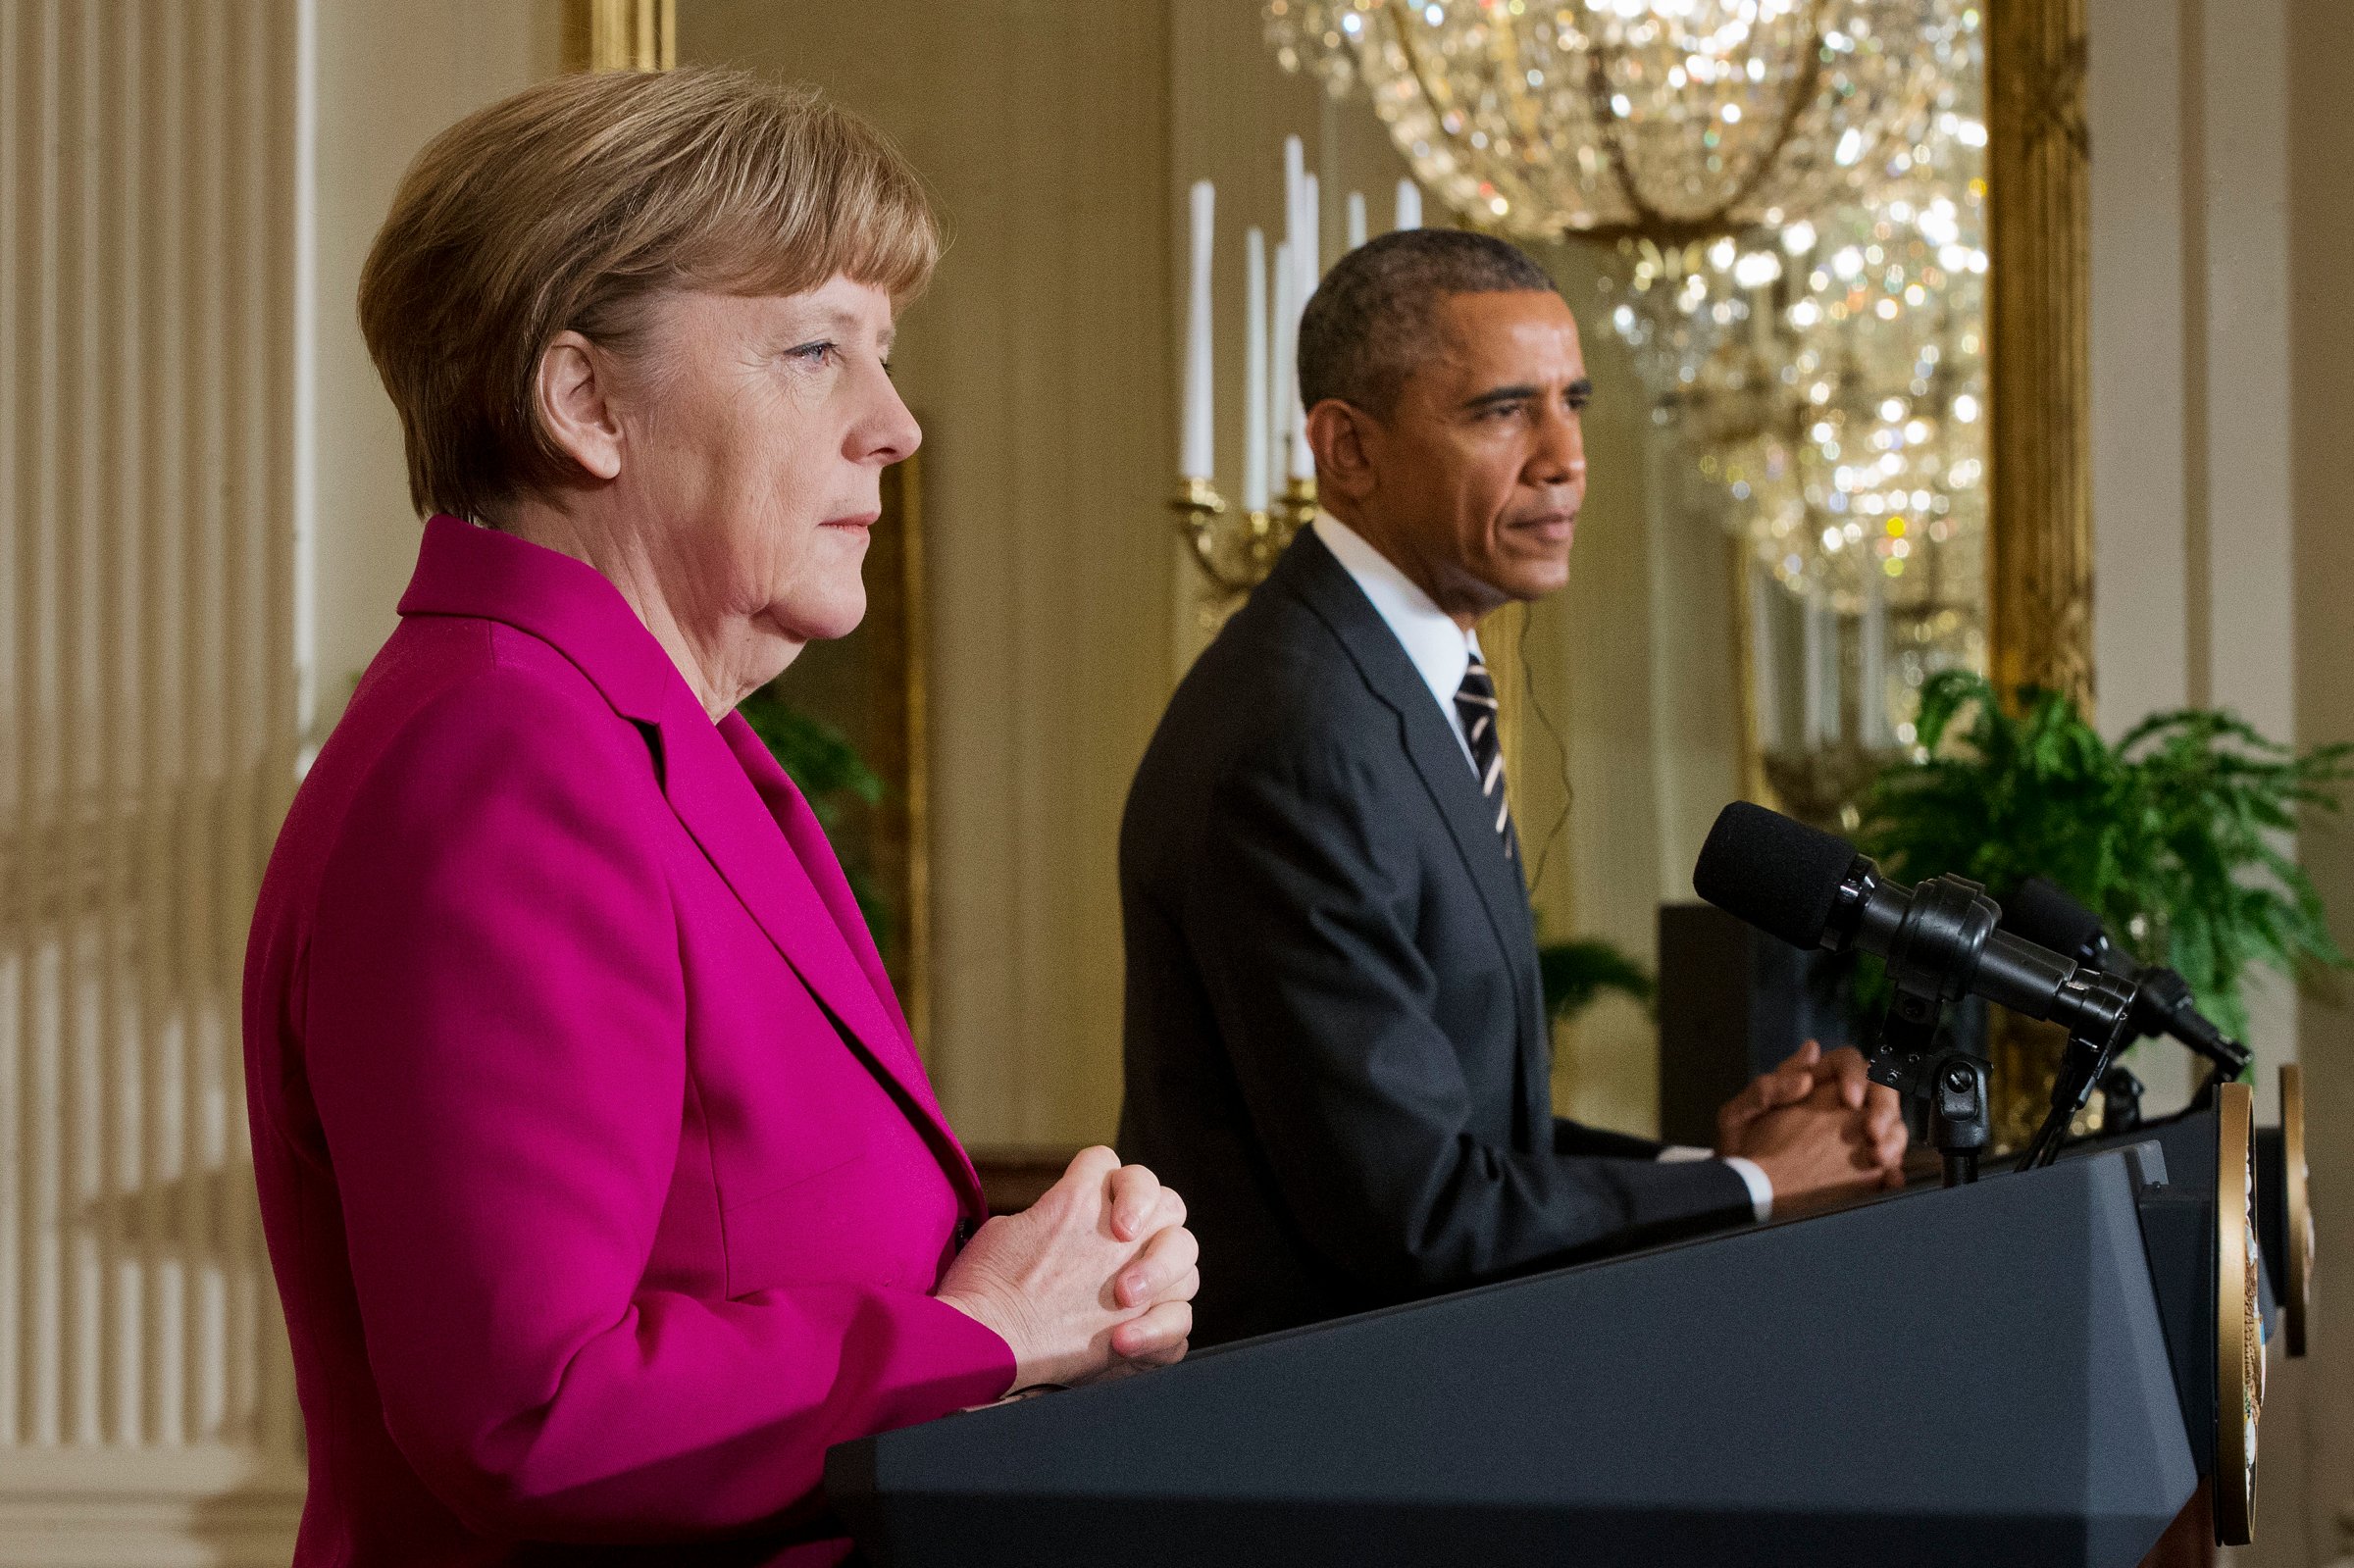 President Barack Obama and German Chancellor Angela Merkel during their joint news conference in the East Room of the White House in Washington on Feb. 9, 2015.